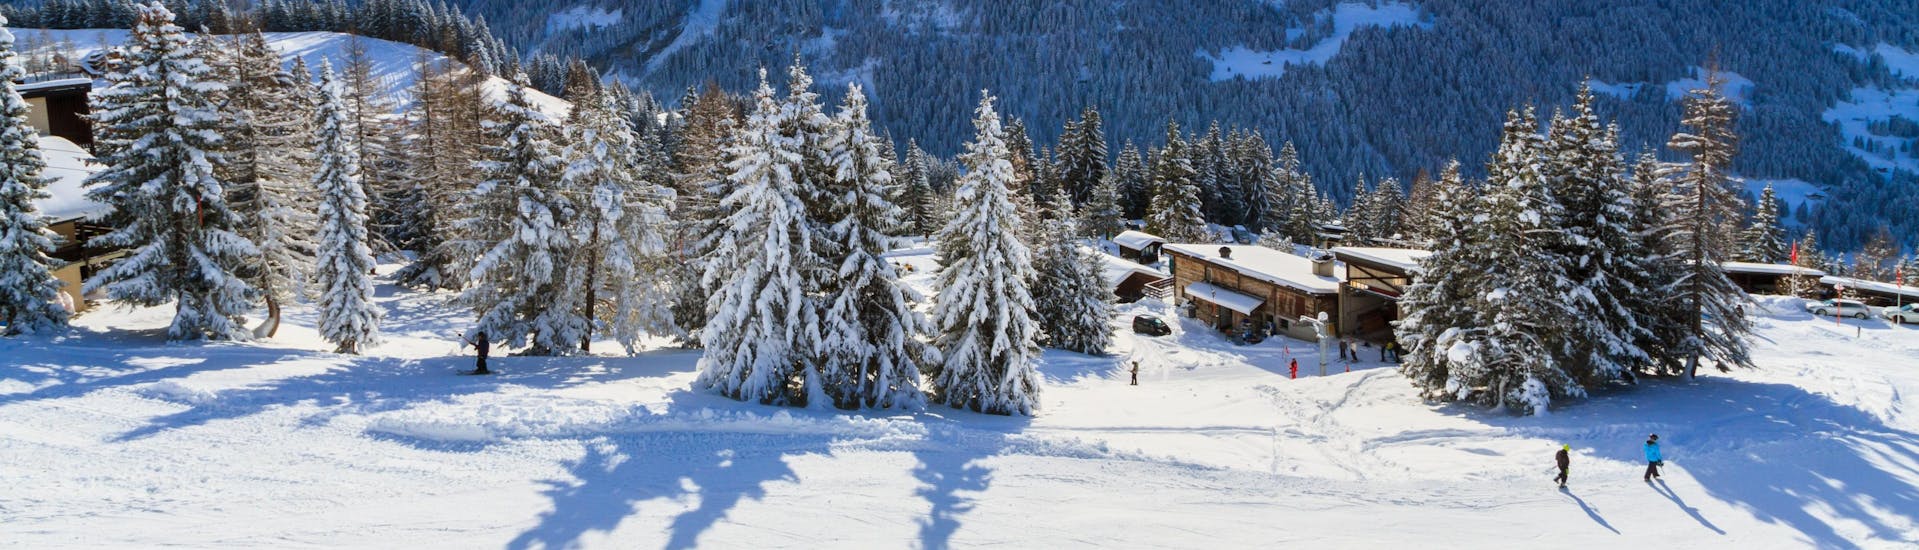 A panoramic view of the ski slopes and the surrounding mountains of Villars-Gryon, a popular Swiss ski resort where visitors can book ski lessons with one of the local ski schools.